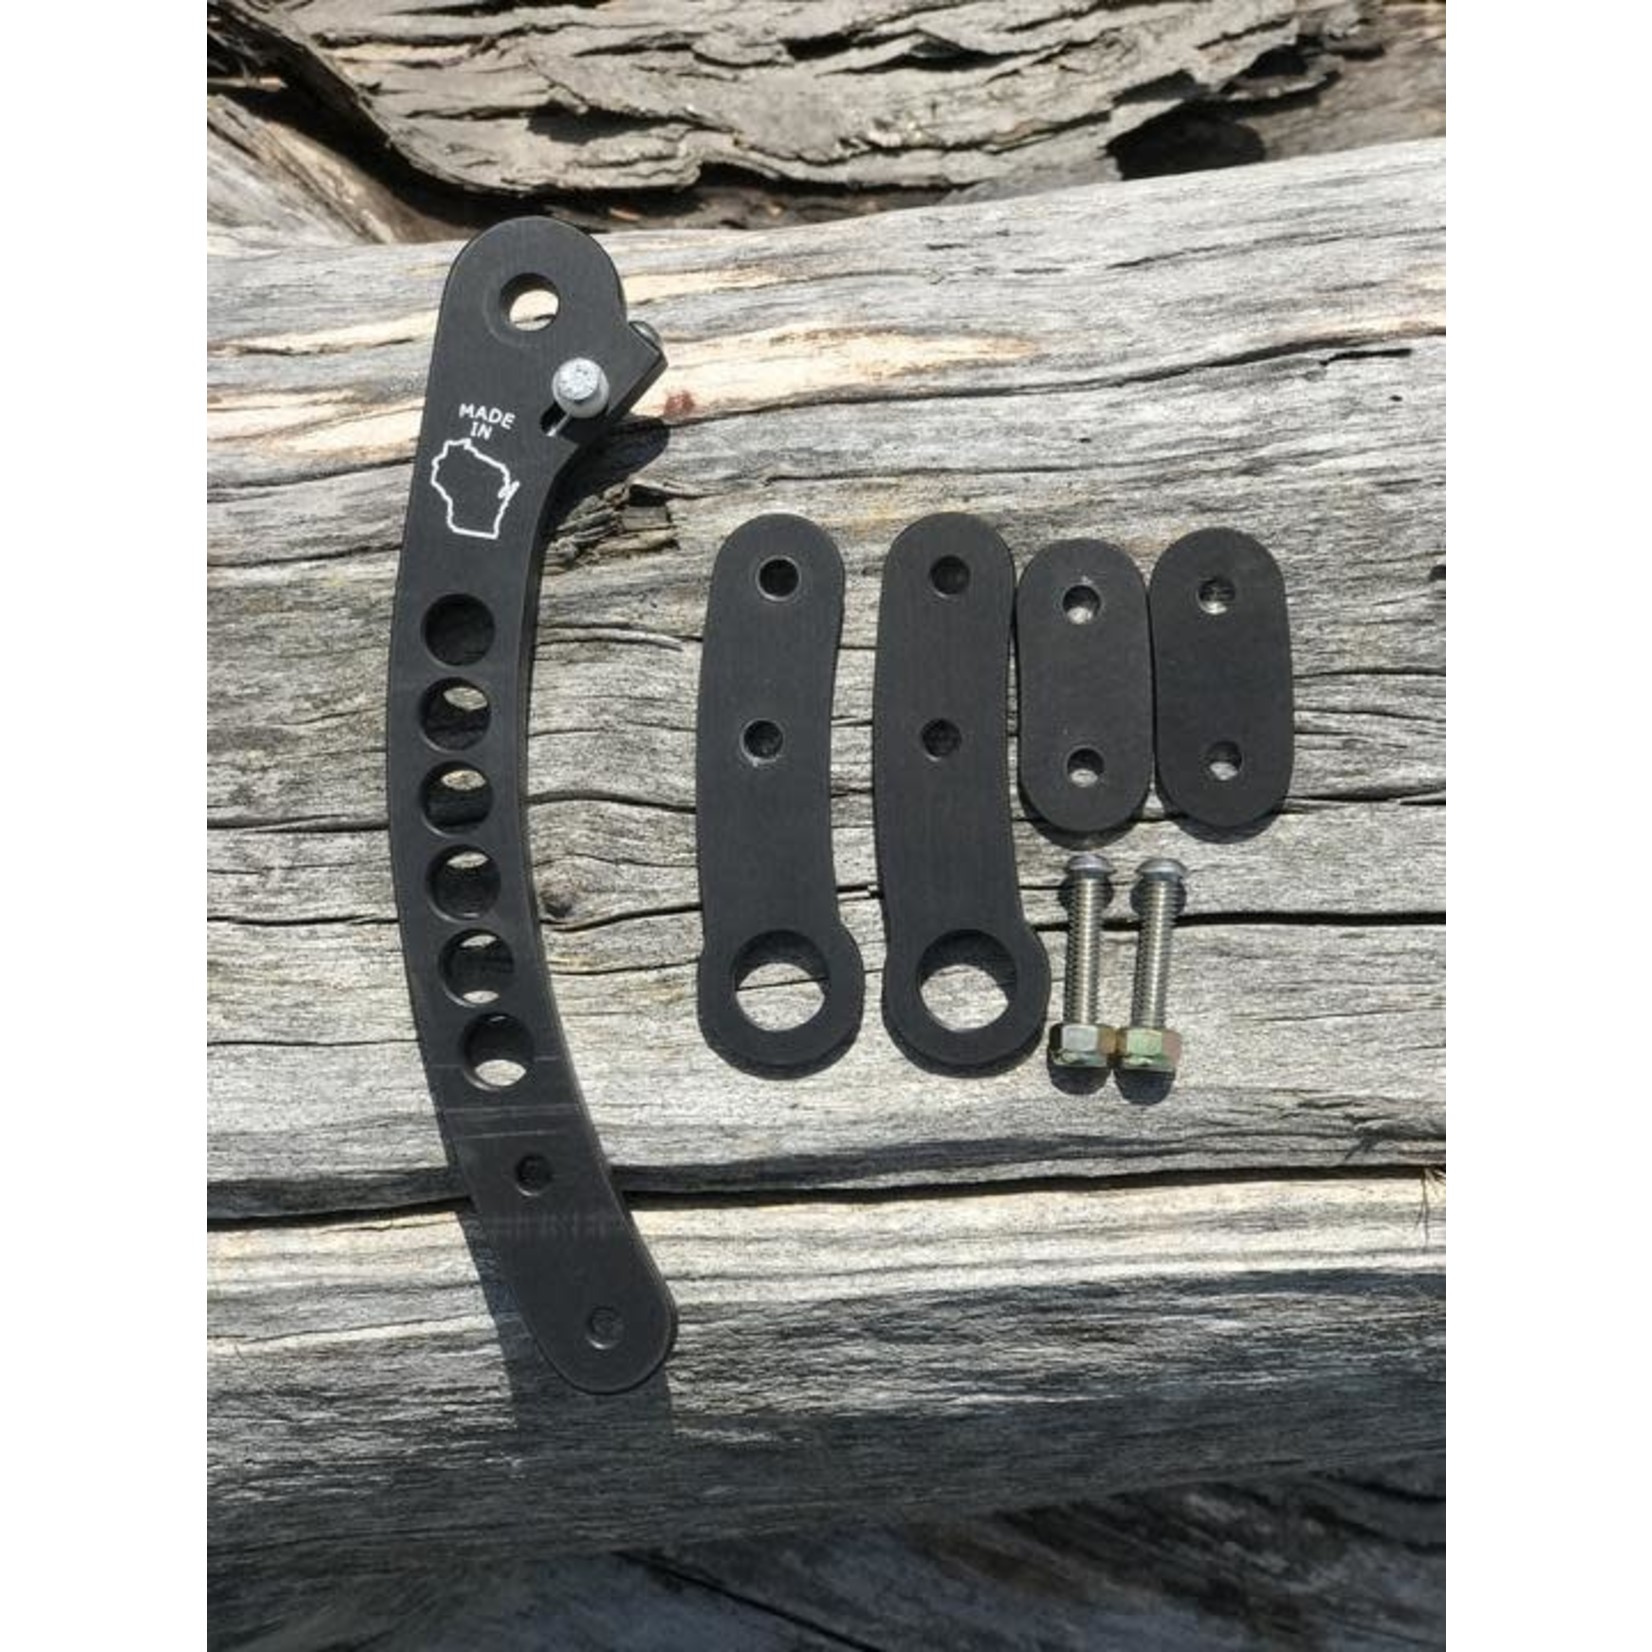 REON ROUNDS REON Rounds Tether, is a Spring Loaded Aluminum Rope Wrench Tether